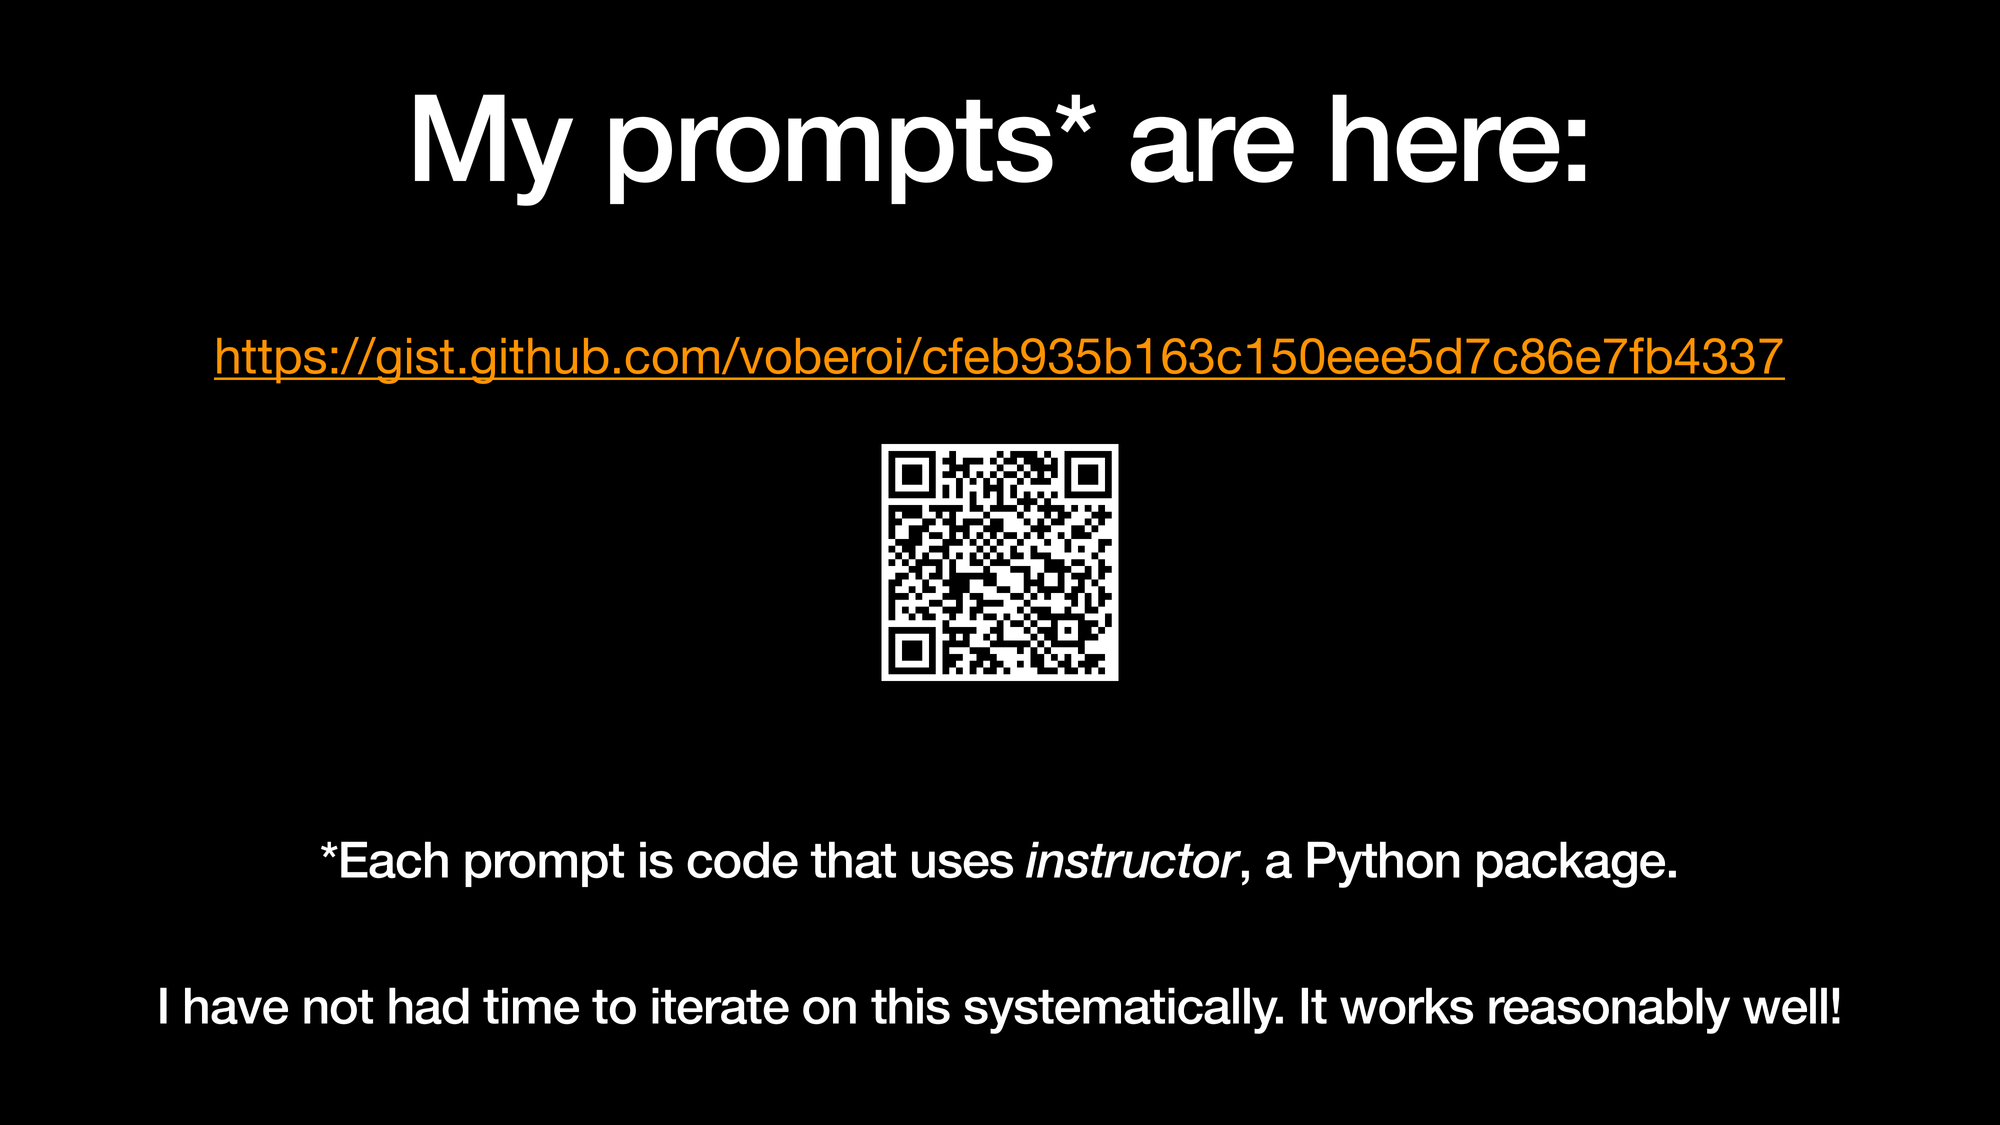 My prompts* are here: https://gist.github.com/voberoi/cfeb935b163c150eee5d7c86e7fb4337. *Each prompt is code that uses instructor, a Python package. I have not had time to iterate on this systematically. It works reasonably well!